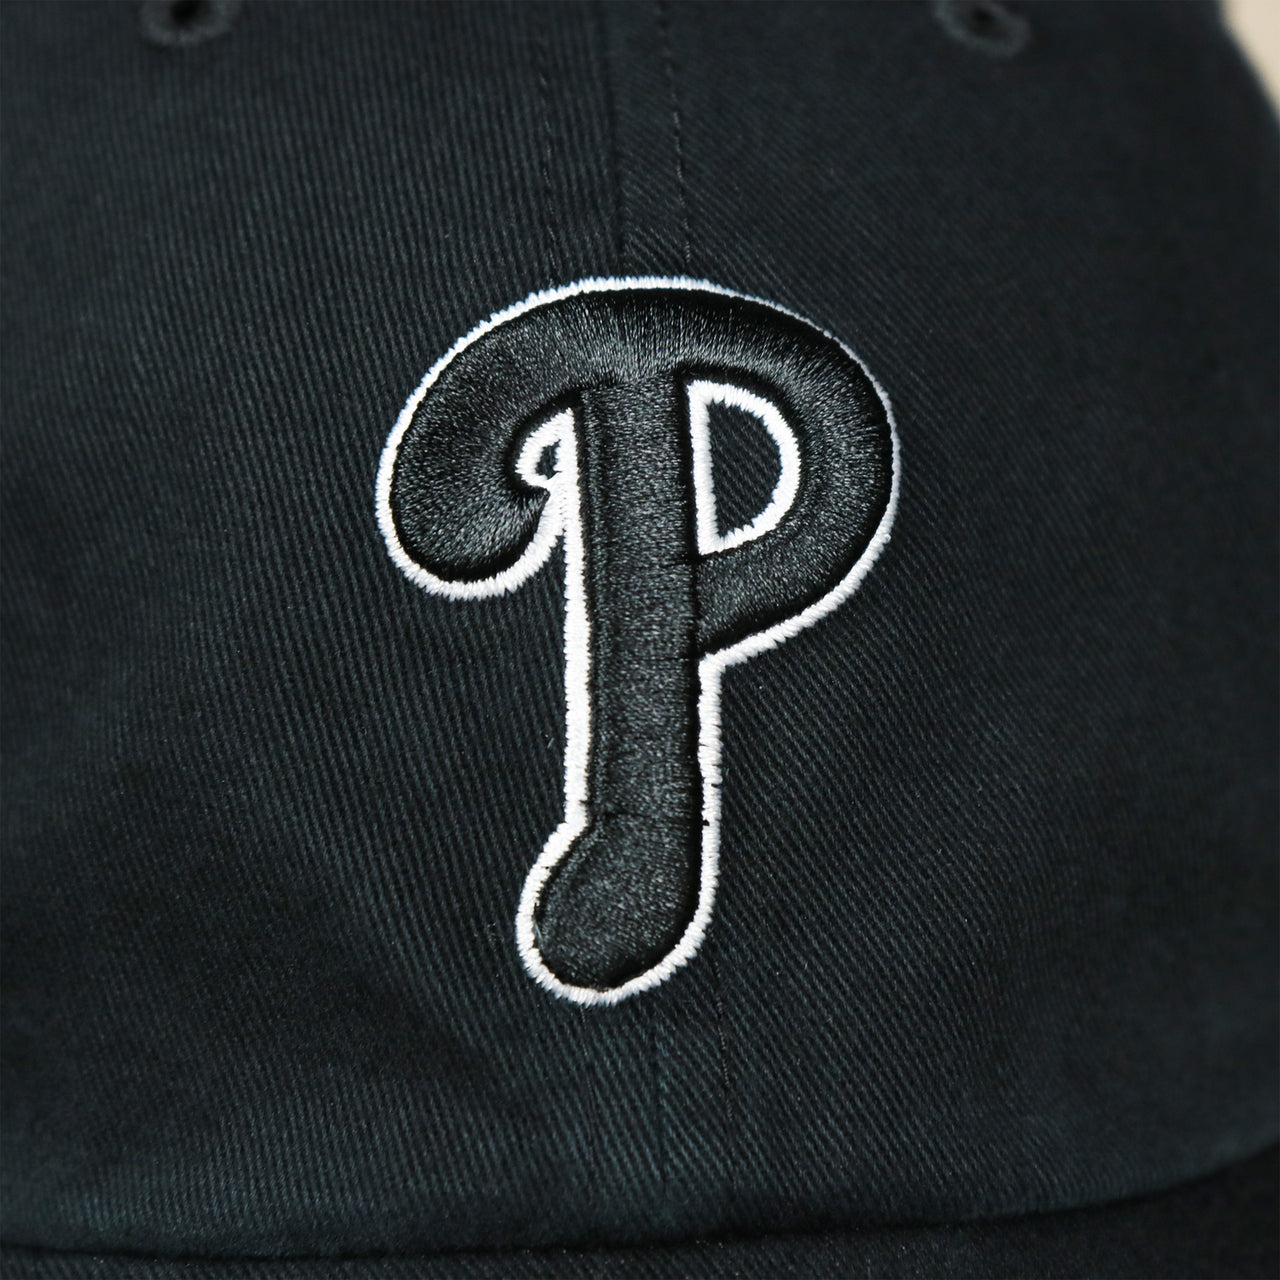 The Phillies Logo on the Cooperstown Philadelphia Phillies Vintage White Logo Dad Hat | Black Dad Hat